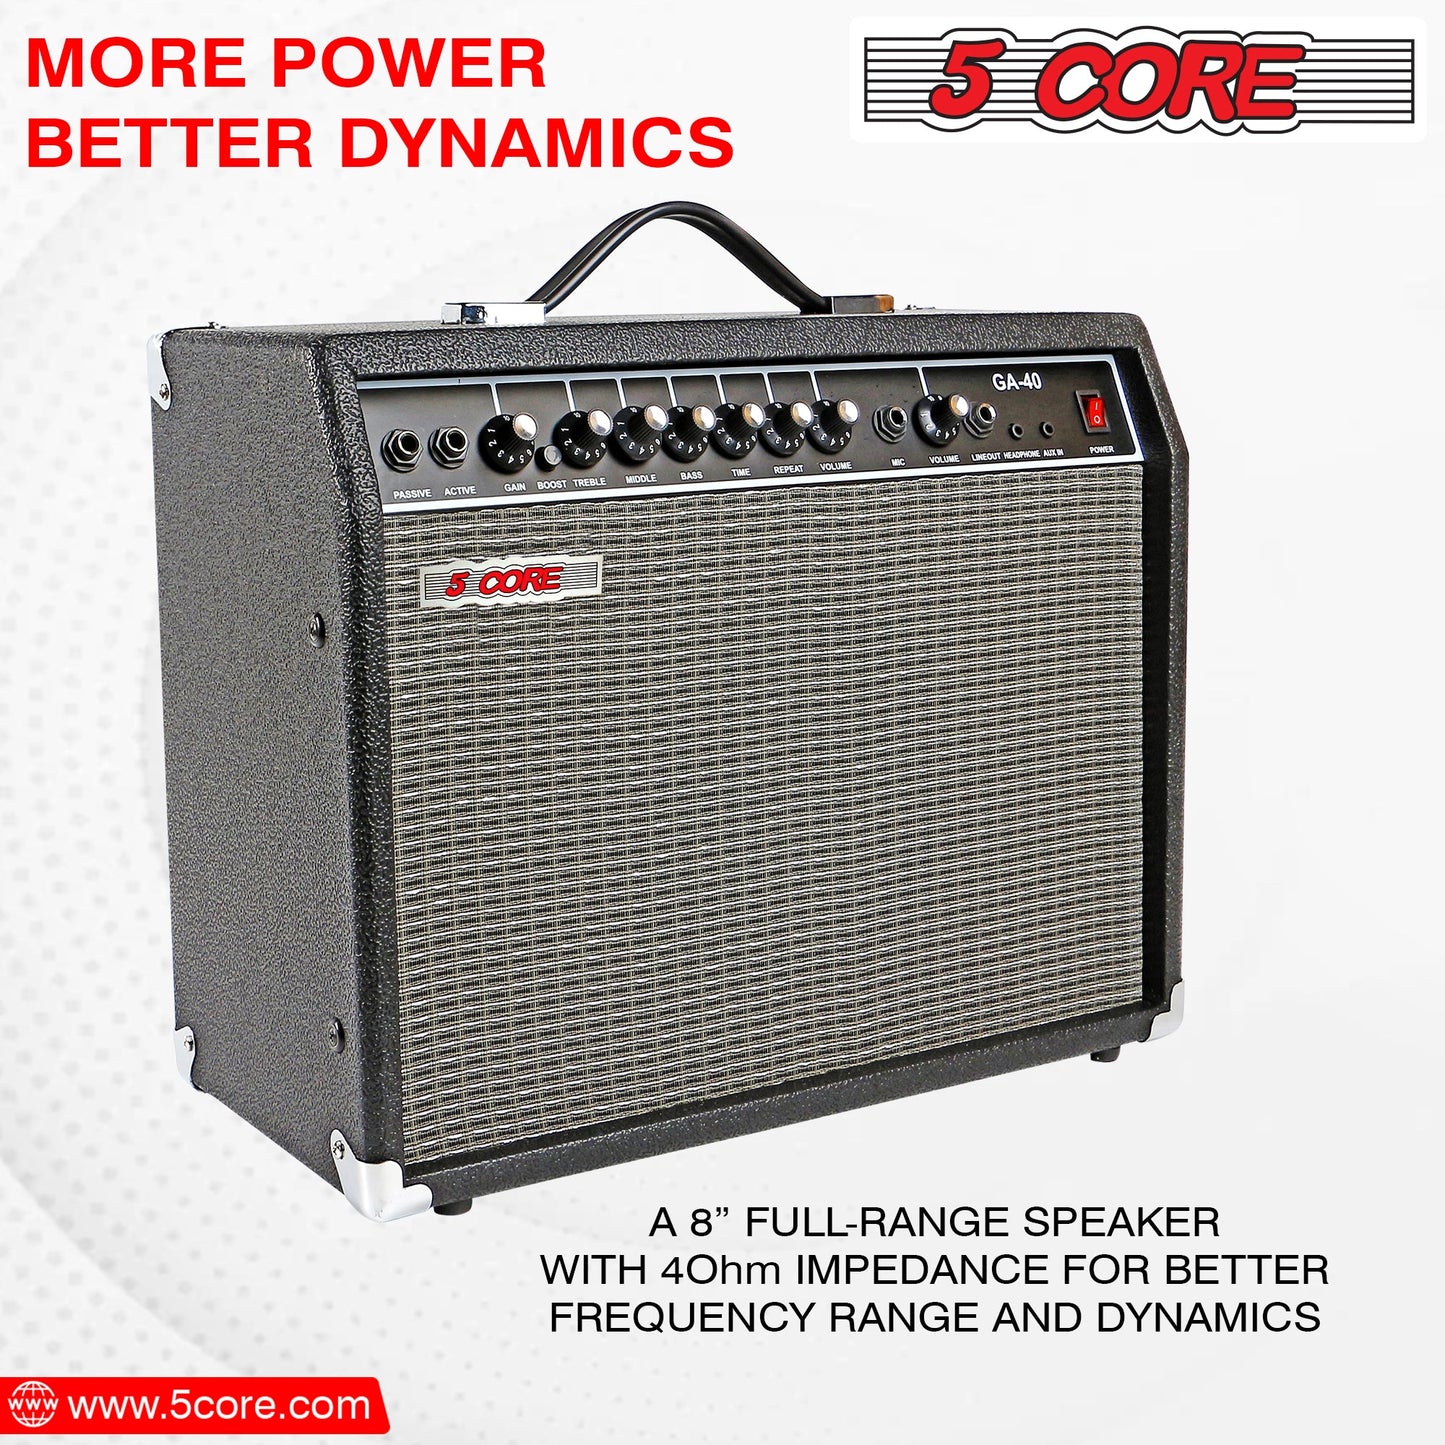 5 Core 40W Guitar Amplifier Black - Clean and Distortion Channel - Electric Amp with Equalization and AUX Line Input - for Recording Studio, Practice Room, Small Courtyard- GA 40 BLK-7